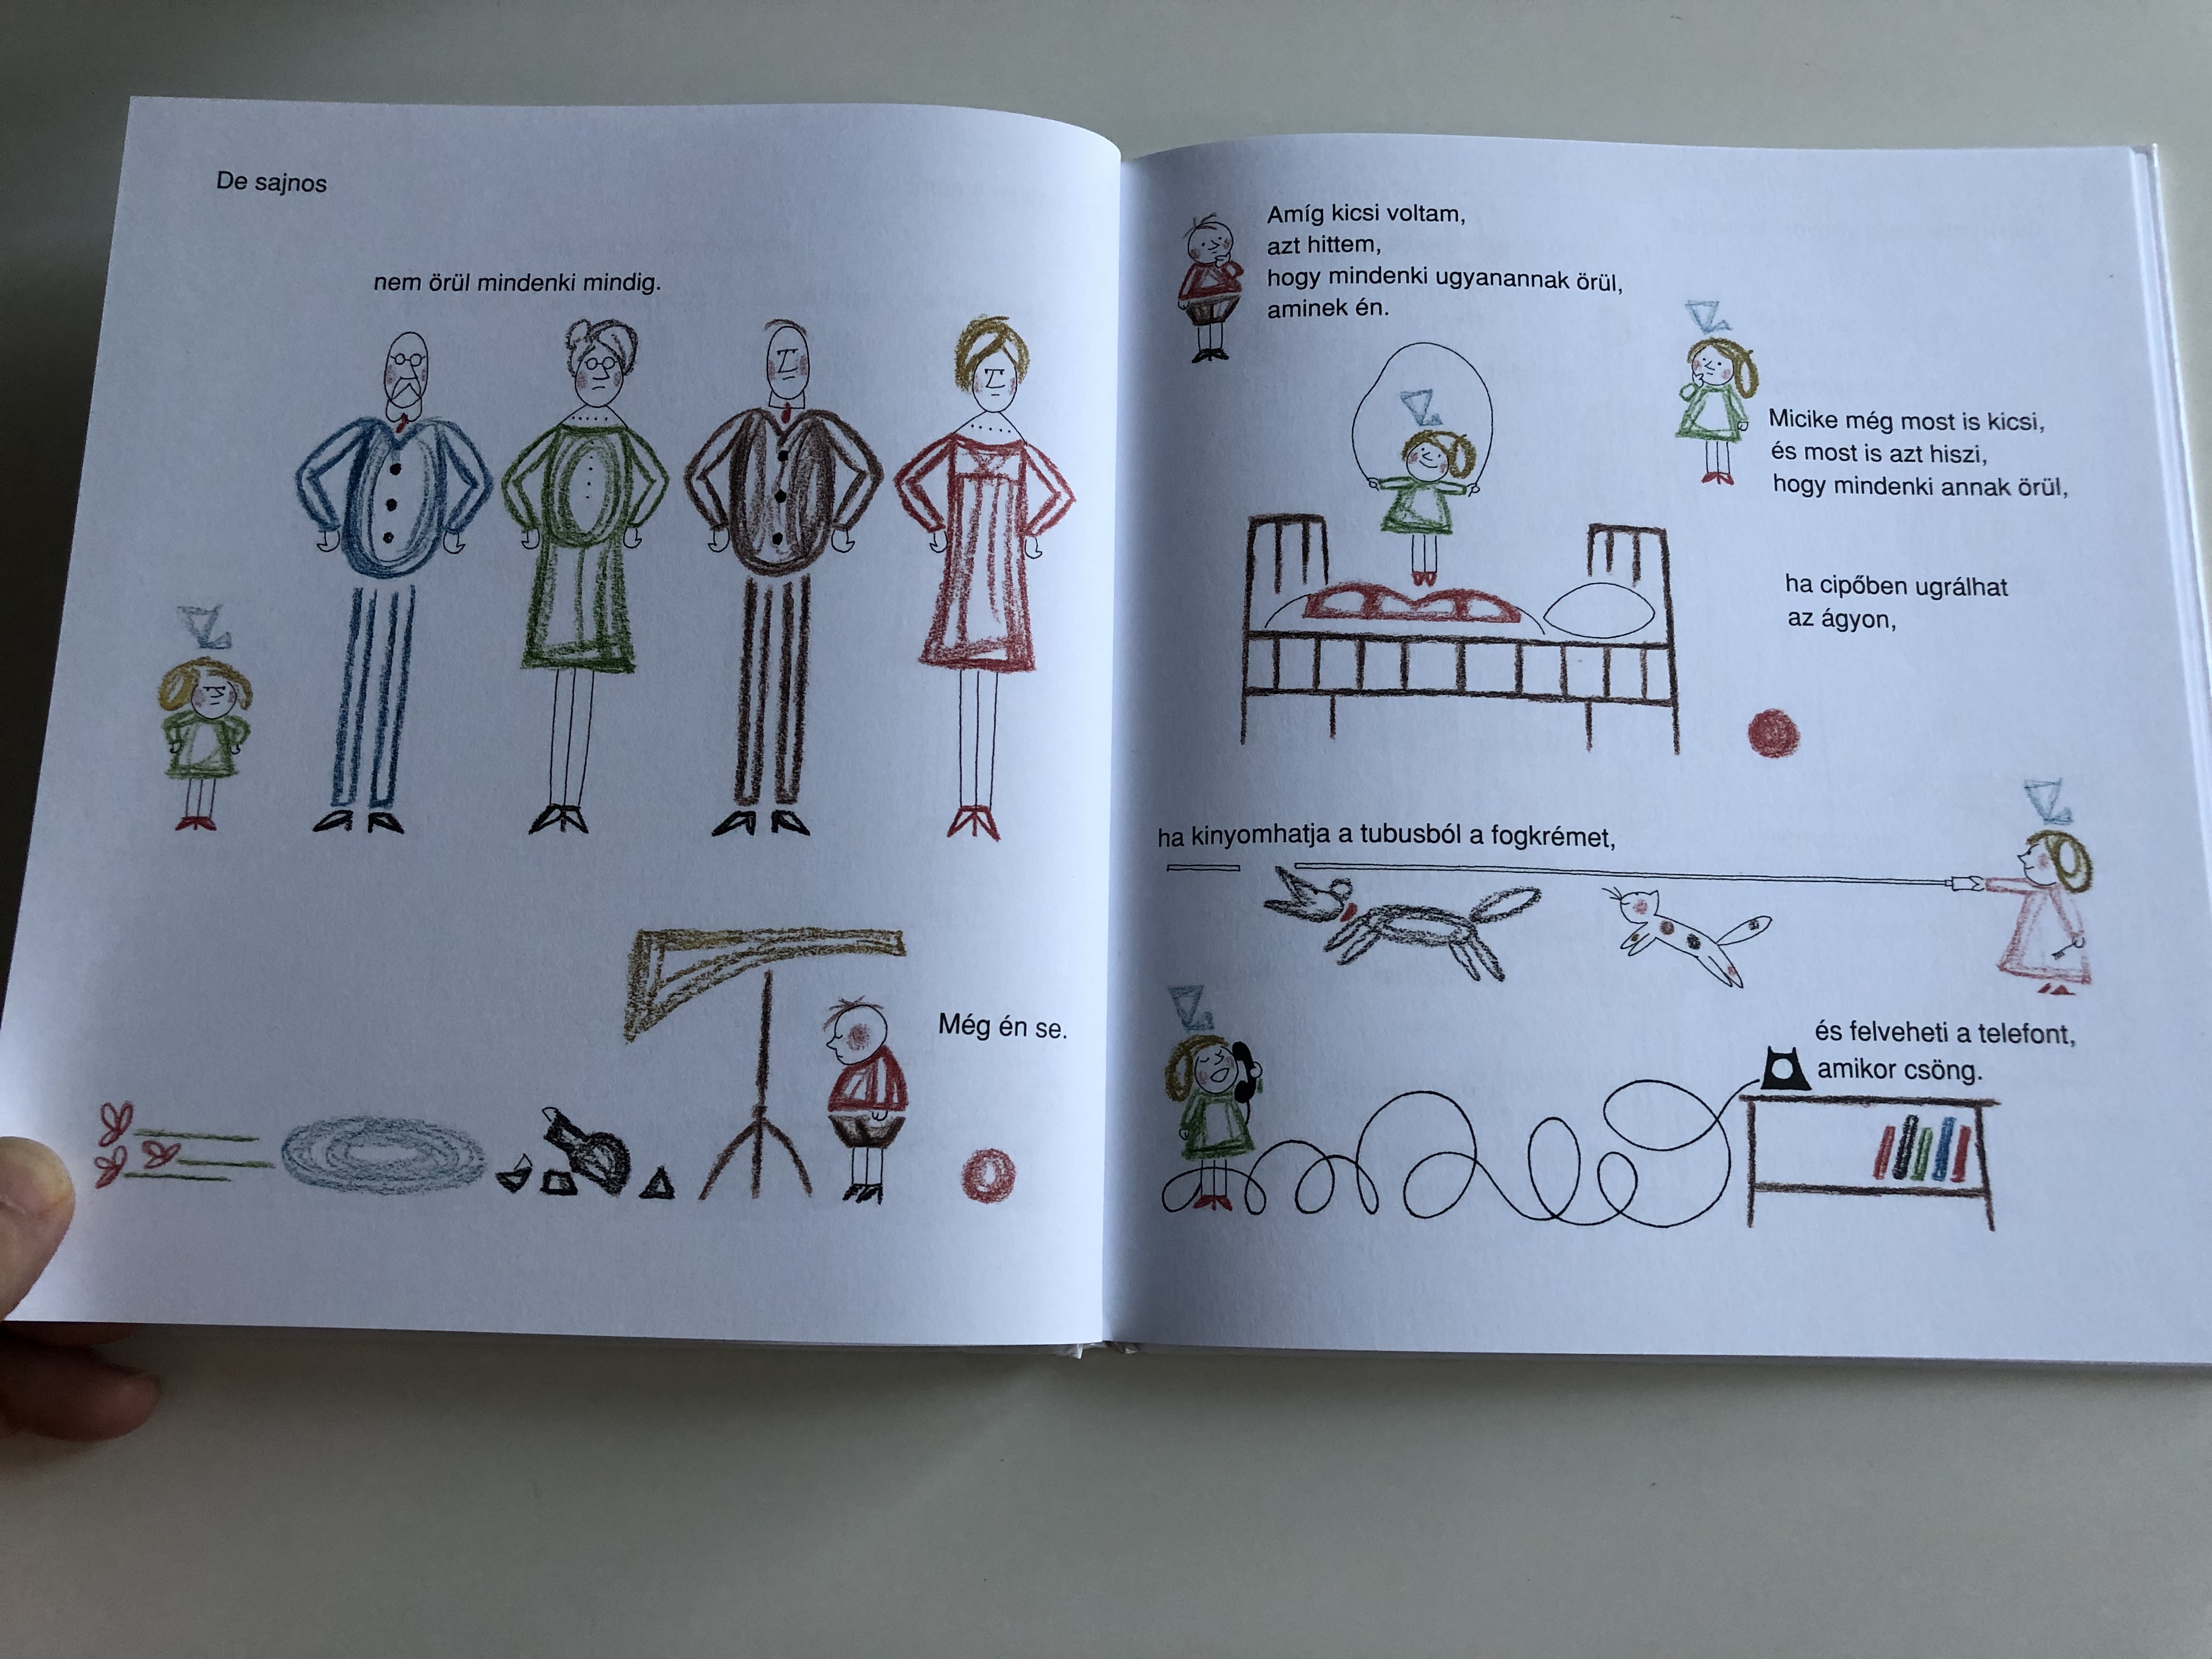 j-nekem-by-janikovszky-va-good-for-me-hungarian-children-s-book-for-ages-3-and-up-r-ber-l-szl-rajzaival-m-ra-k-nyvkiad-2012-7th-edition-4-.jpg